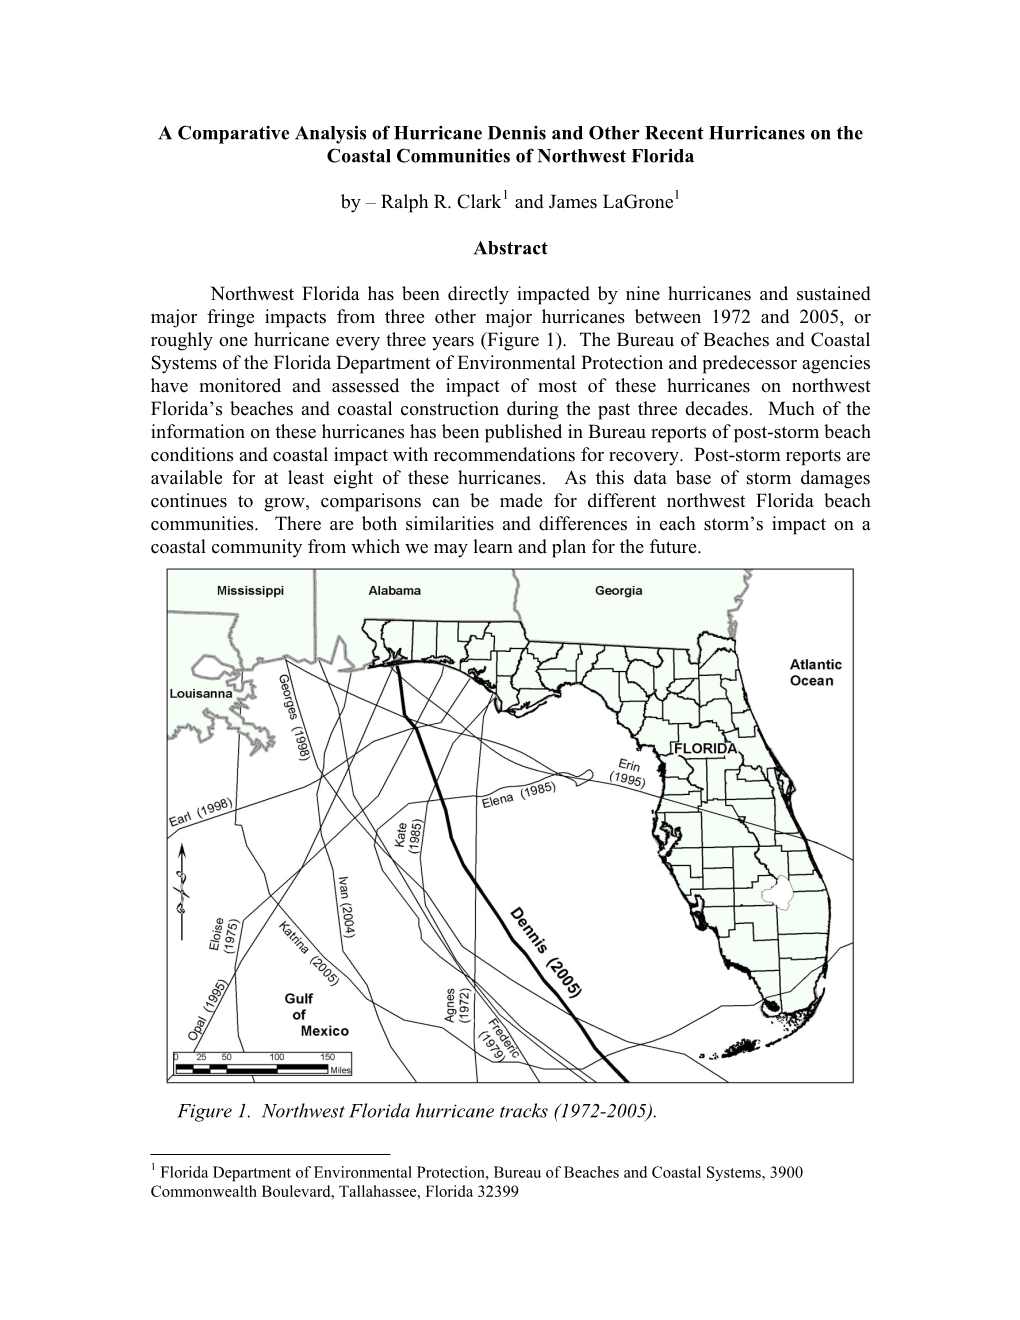 A Comparative Analysis of Hurricane Dennis and Other Recent Hurricanes on the Coastal Communities of Northwest Florida